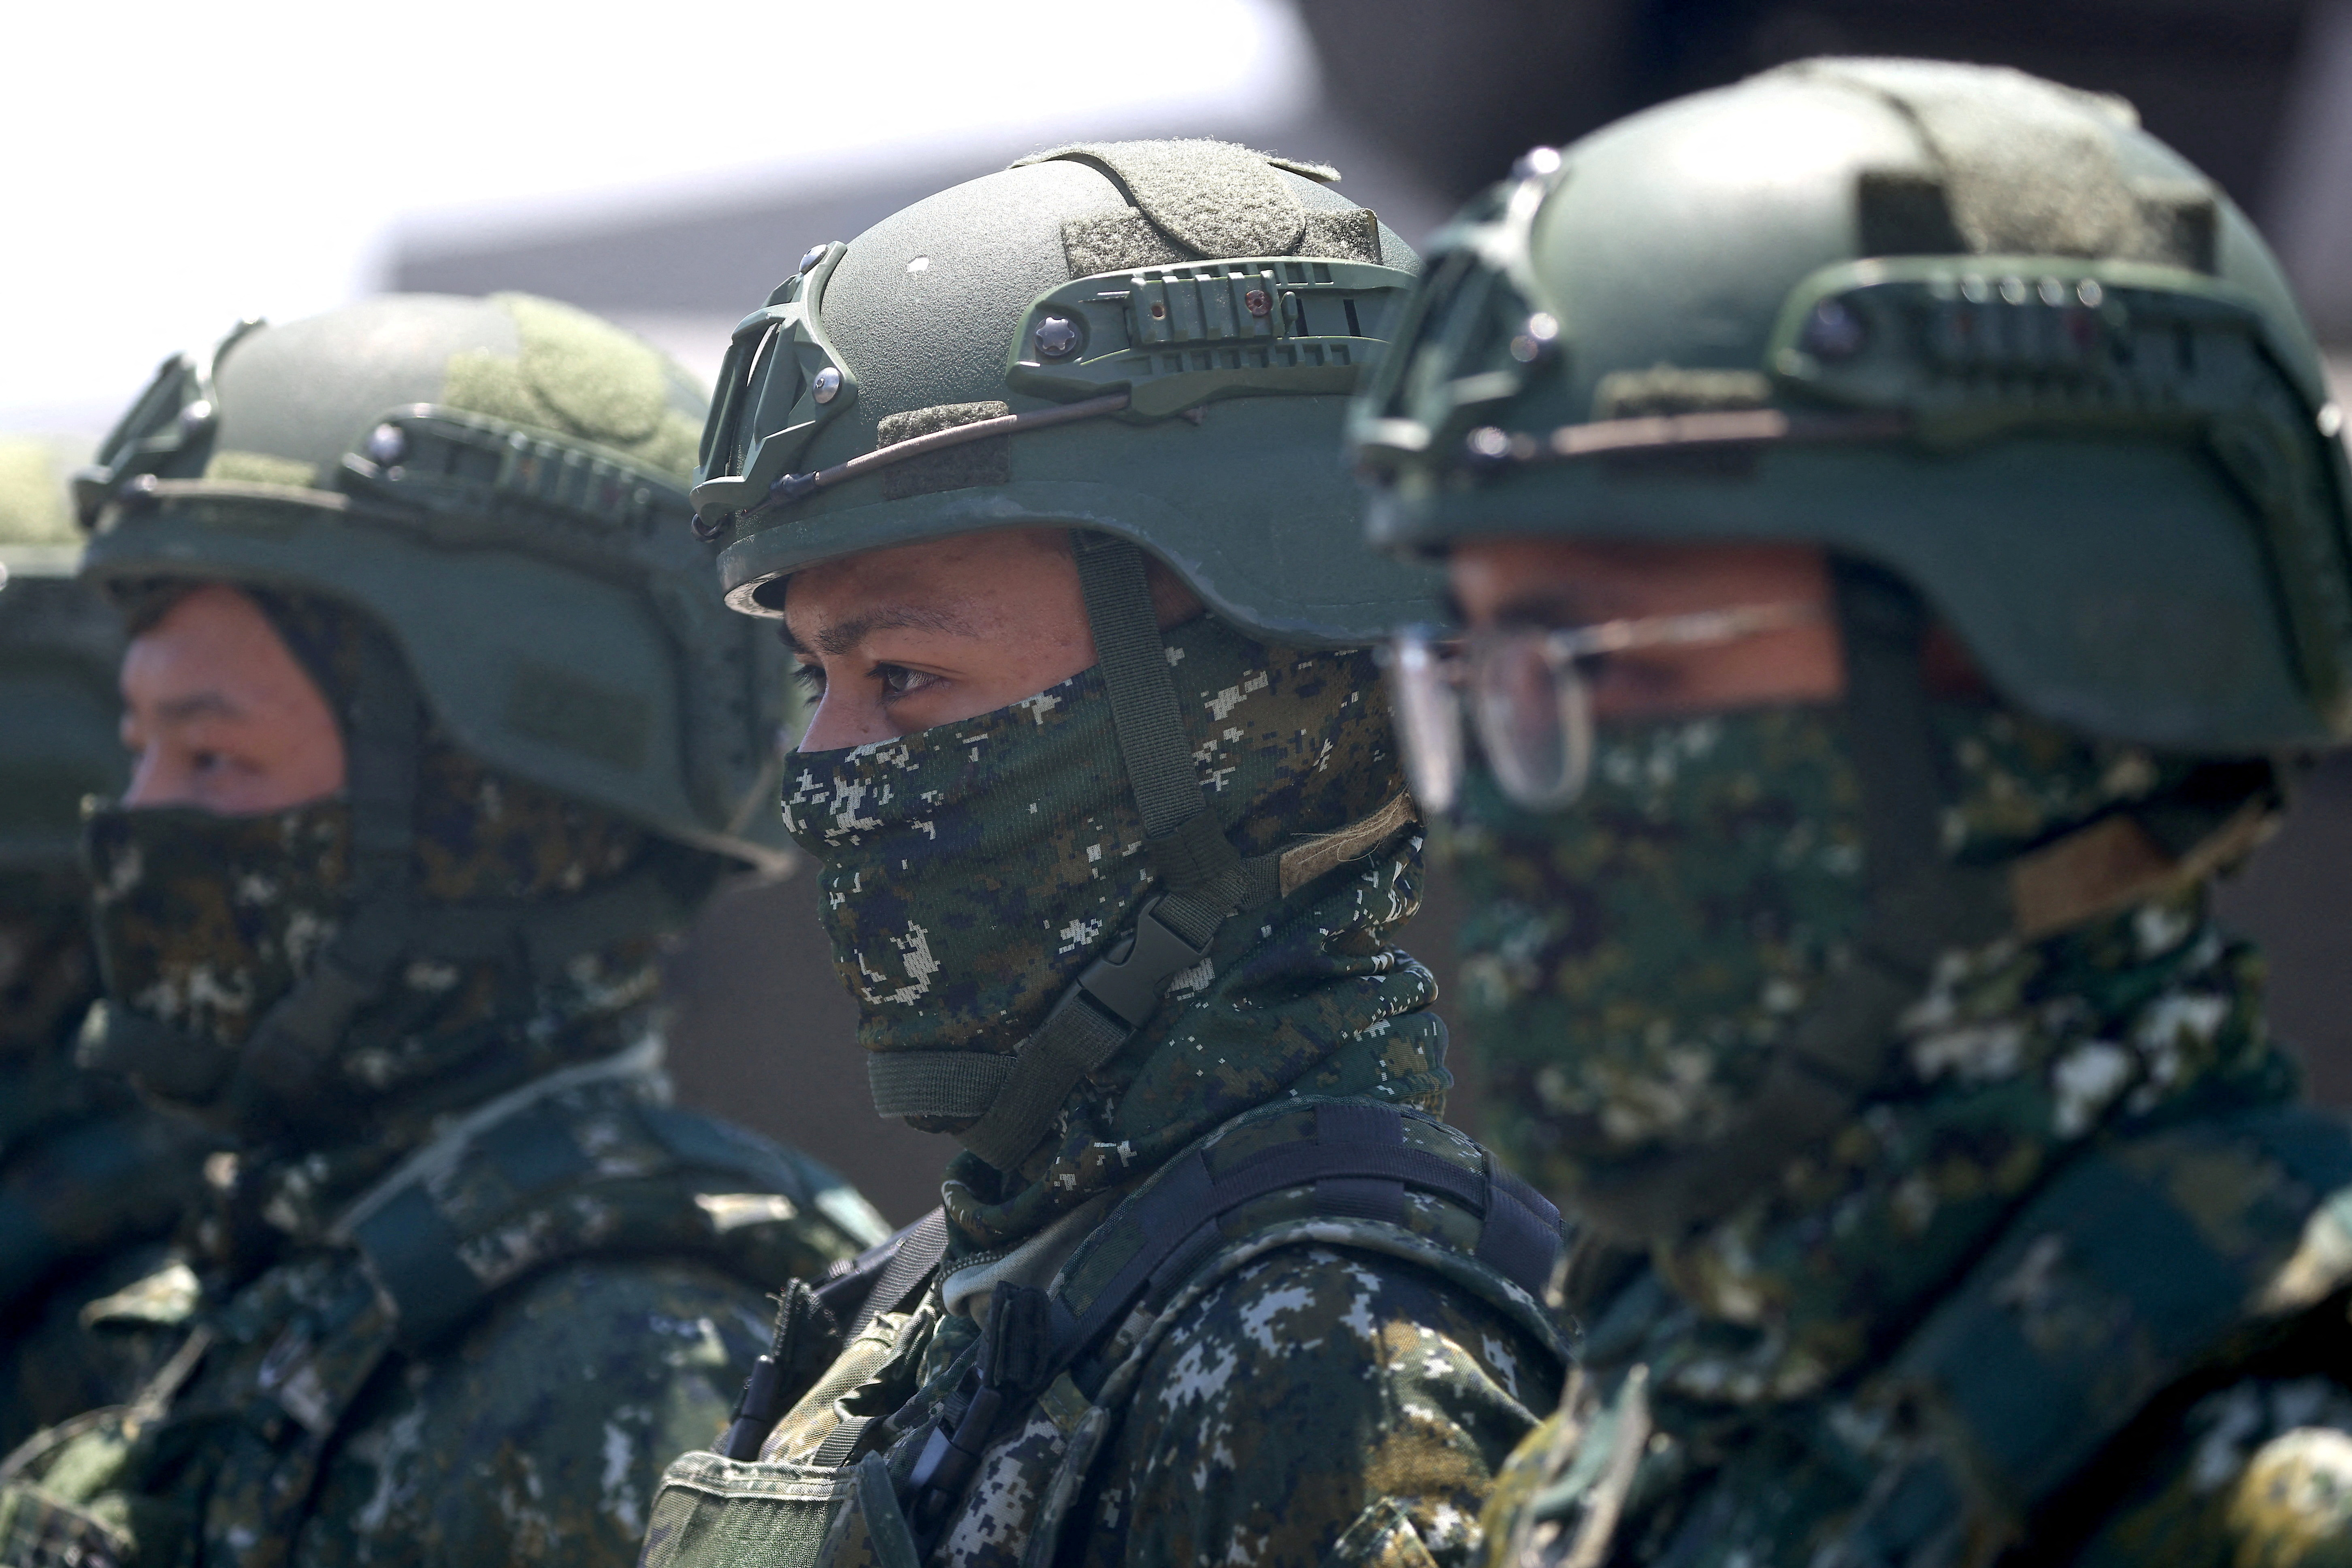 Soldiers stand guard at an airbase in Hualien (REUTERS/Ann Wang)